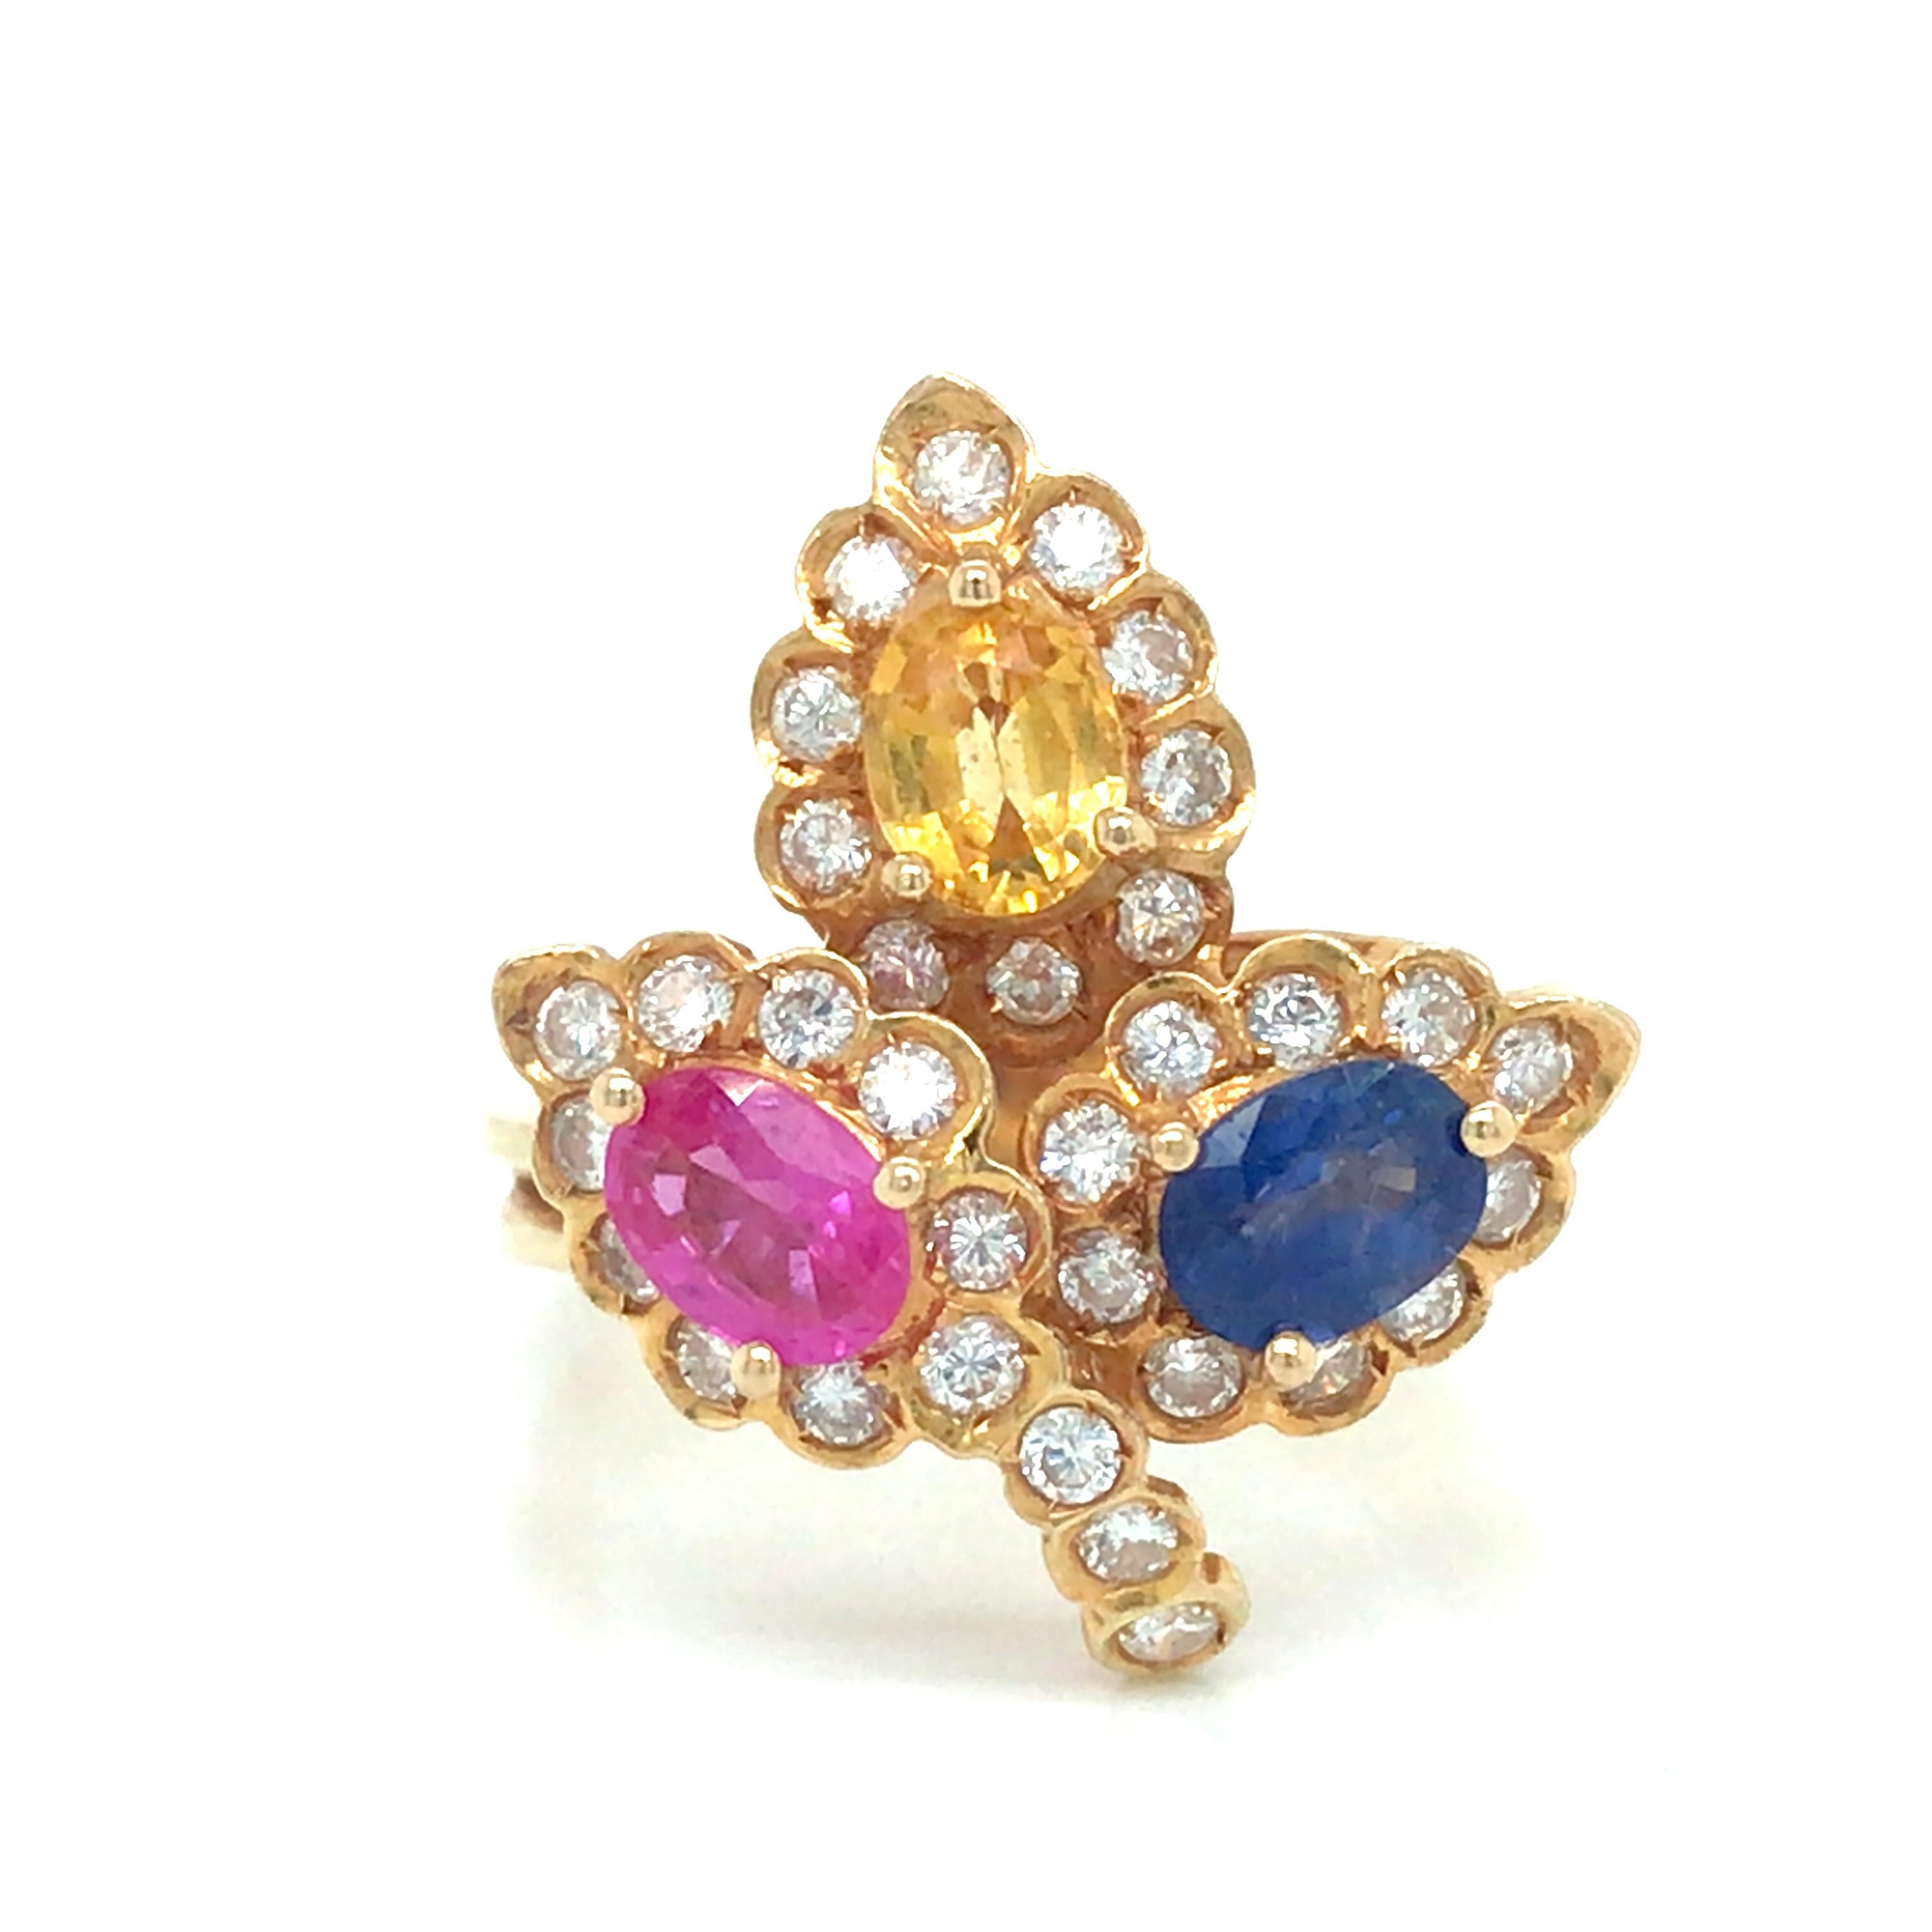 Sapphire Diamond Flower Cluster Ring in 18K Yellow Gold.  Yellow, Pink and Blue Pear Shape Sapphires weighing 1.50 carat total weight and (33) Round Brilliant Cut Diamonds weighing 0.66 carat total weight are expertly set.  The Ring measures 7/8